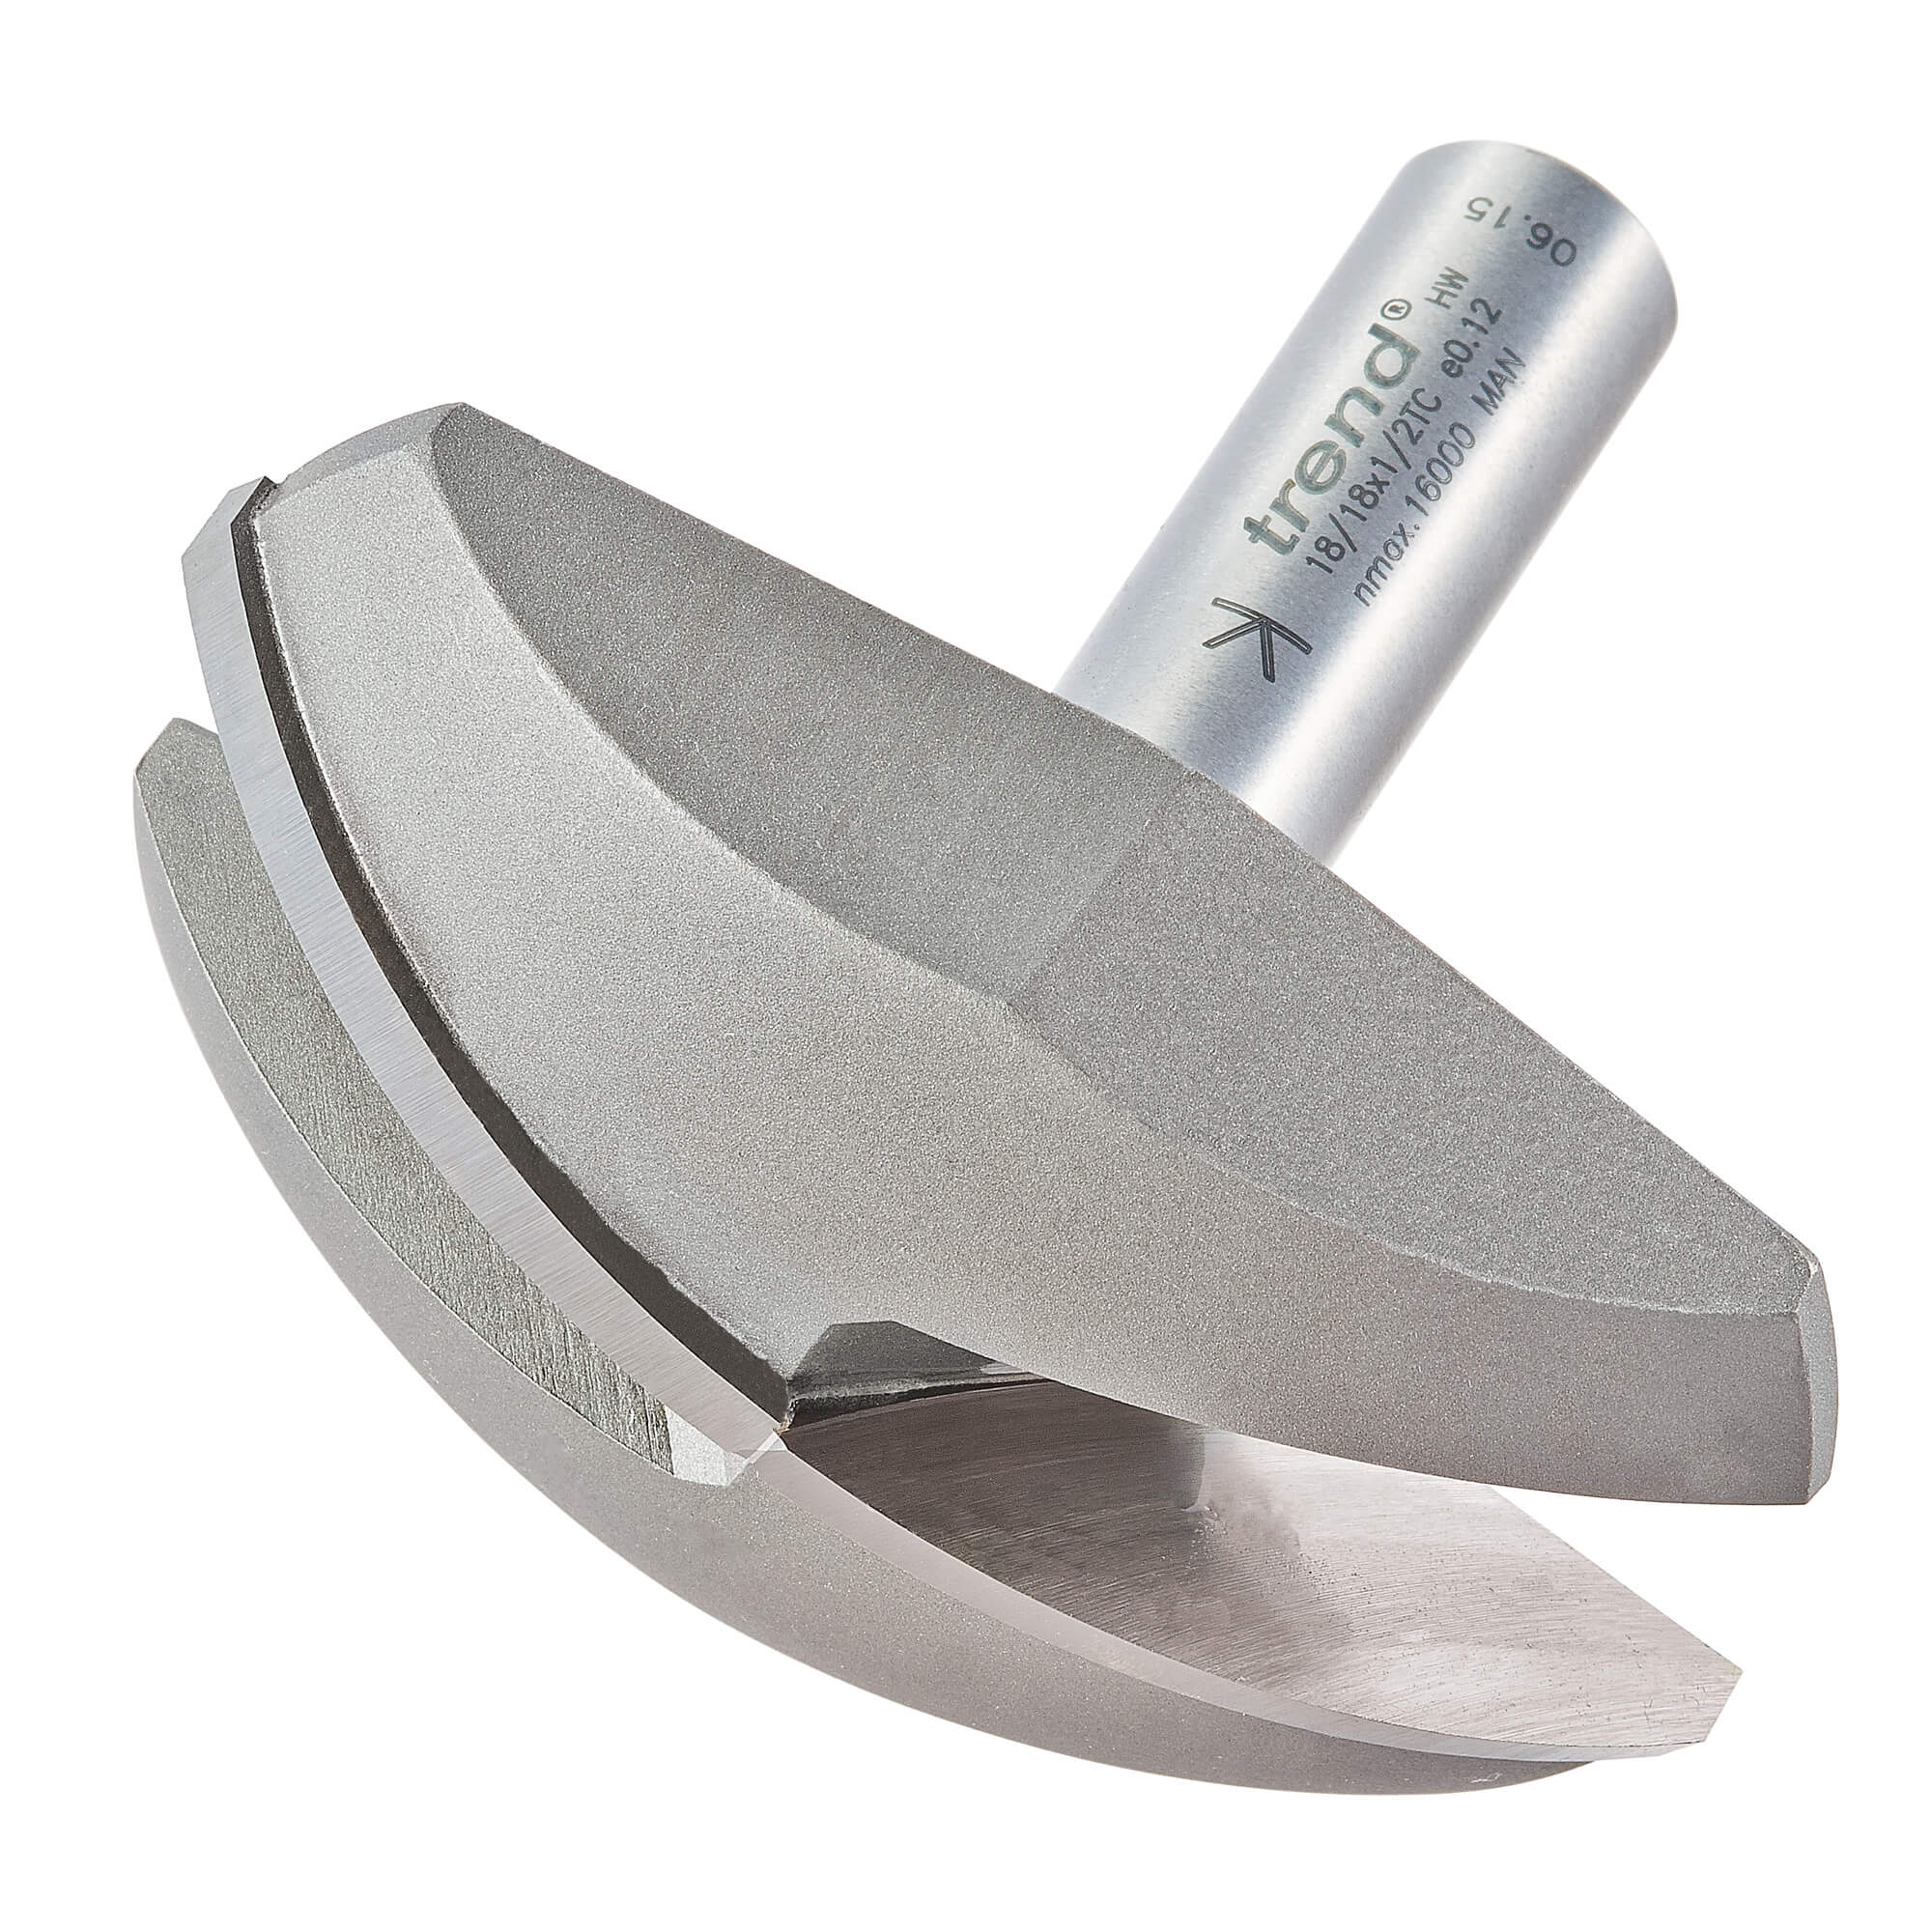 Image of Trend Dished Radius Panel Router Cutter 73mm 22mm 1/2"